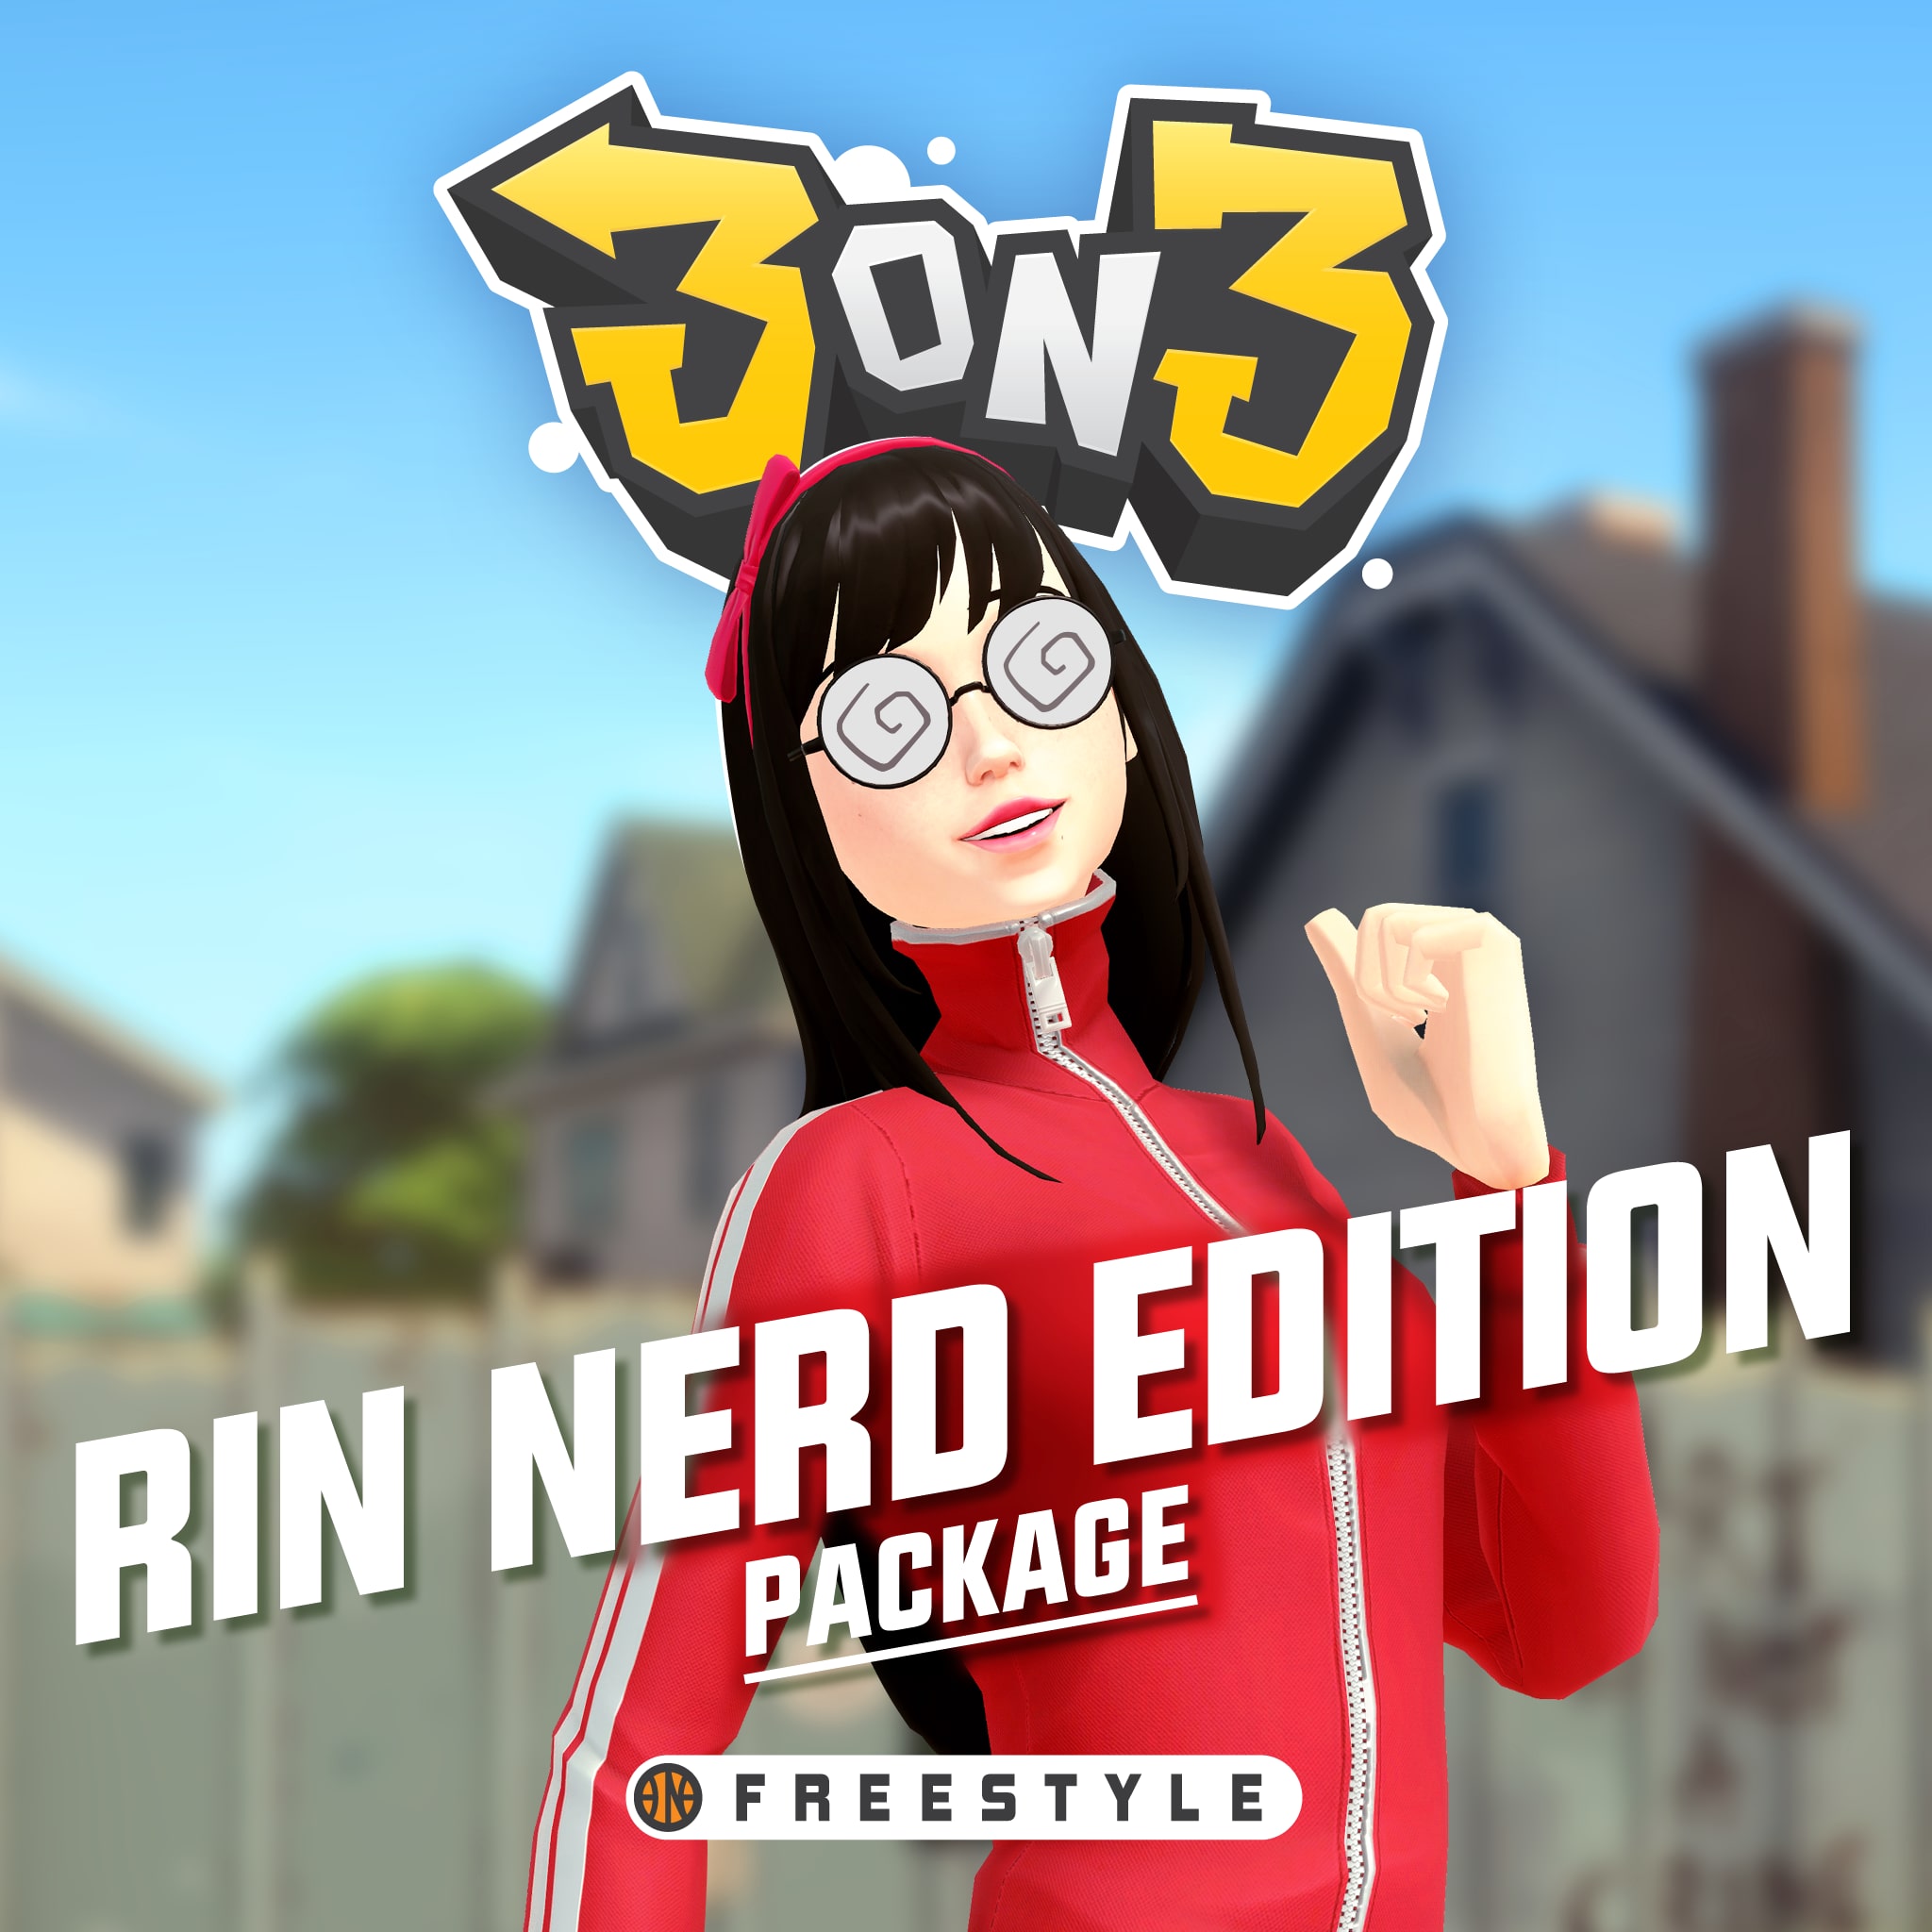 3on3 FreeStyle - Paquete Rin Nerd Edition